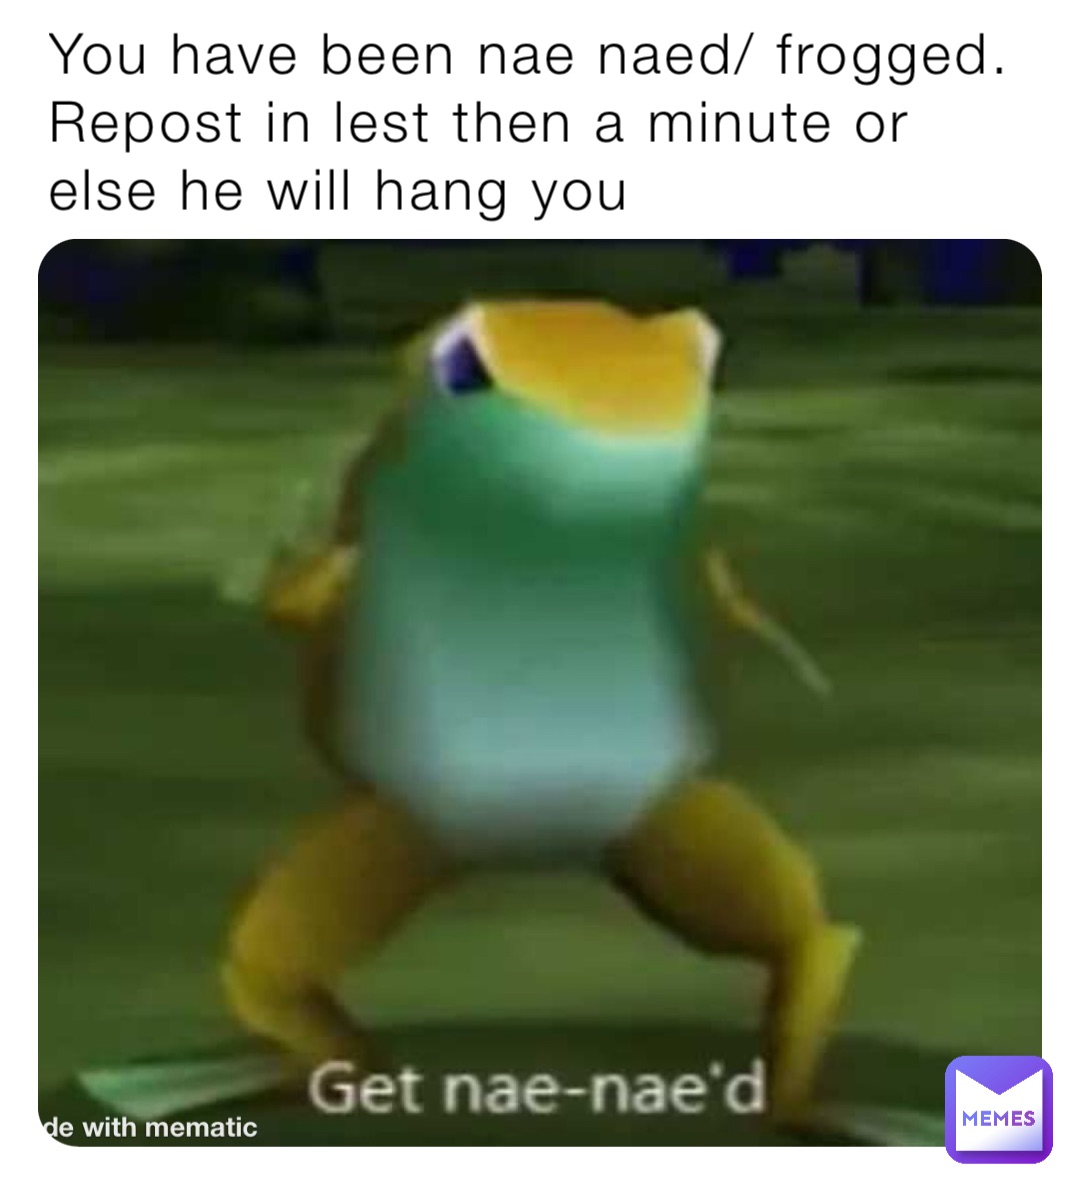 You have been nae naed/ frogged.
Repost in lest then a minute or else he will hang you